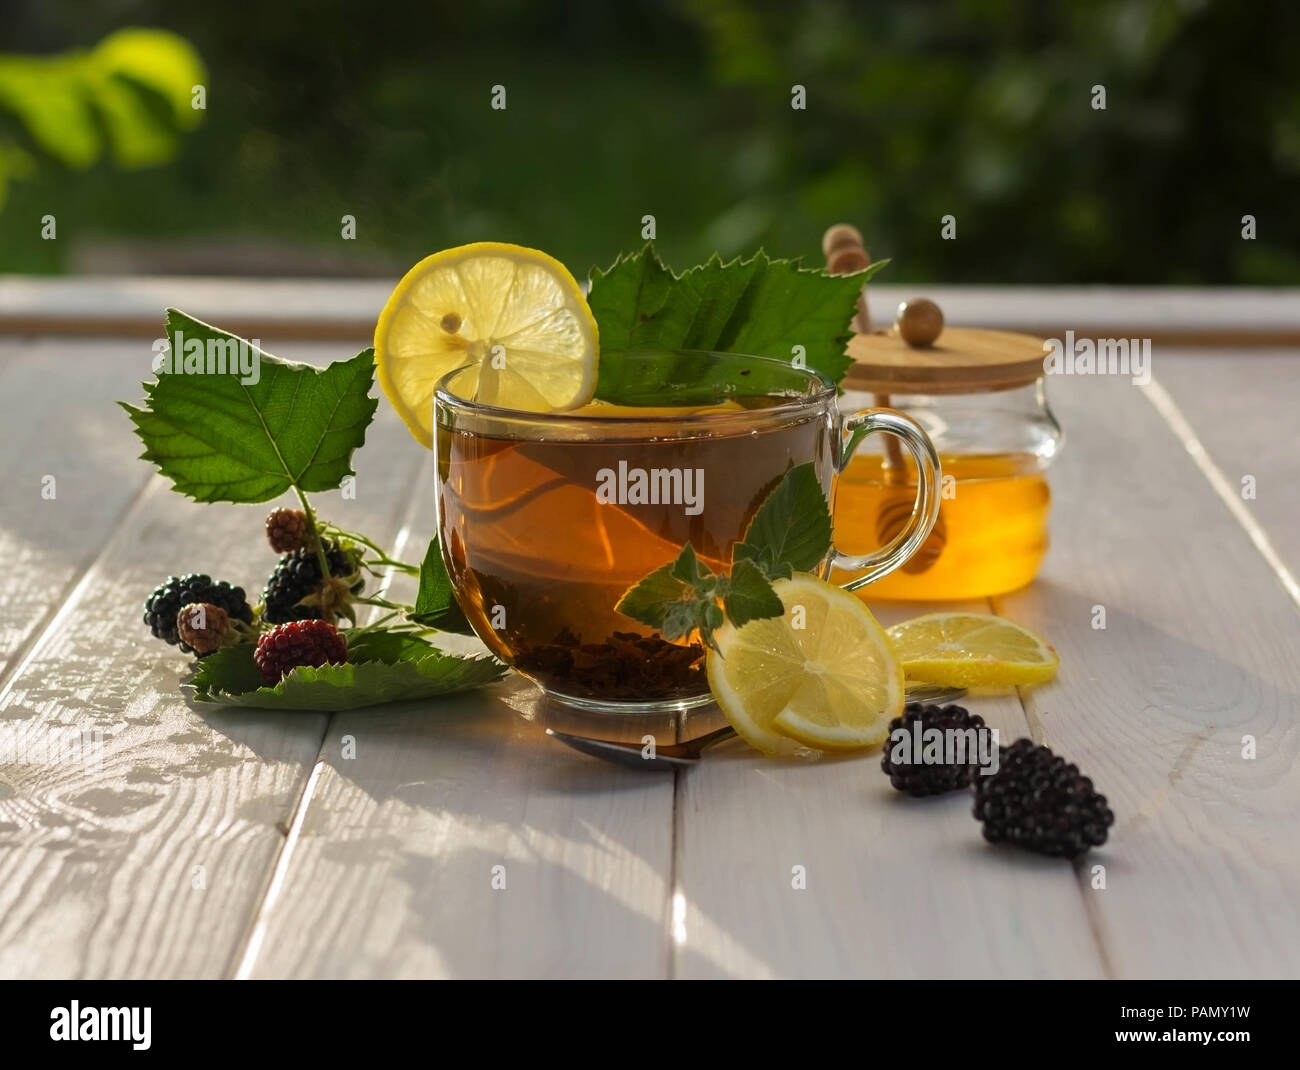 Healthy breakfast concept. Aromatic tea, blackberries, lemon slices and honey dipper on a white wooden table in the gardentable in the garden Stock Photo